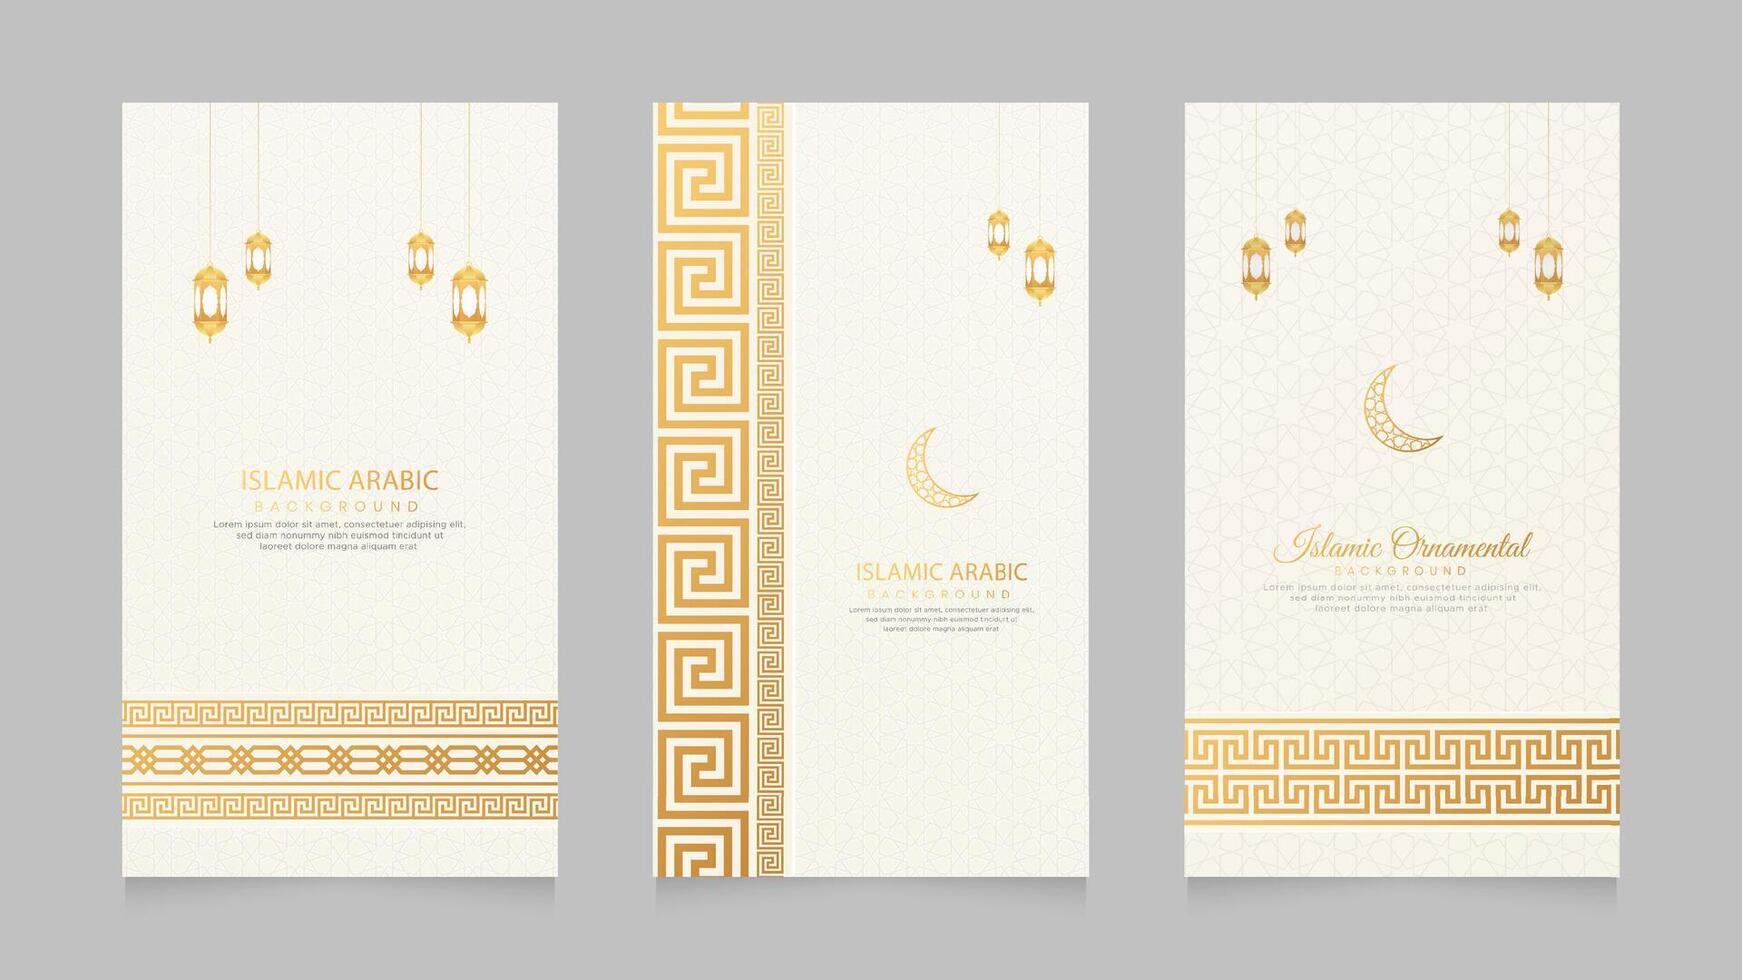 Eid Mubarak and Ramadan Islamic Realistic Social Media Stories Collection Template with Greek Pattern Brushes Borders vector